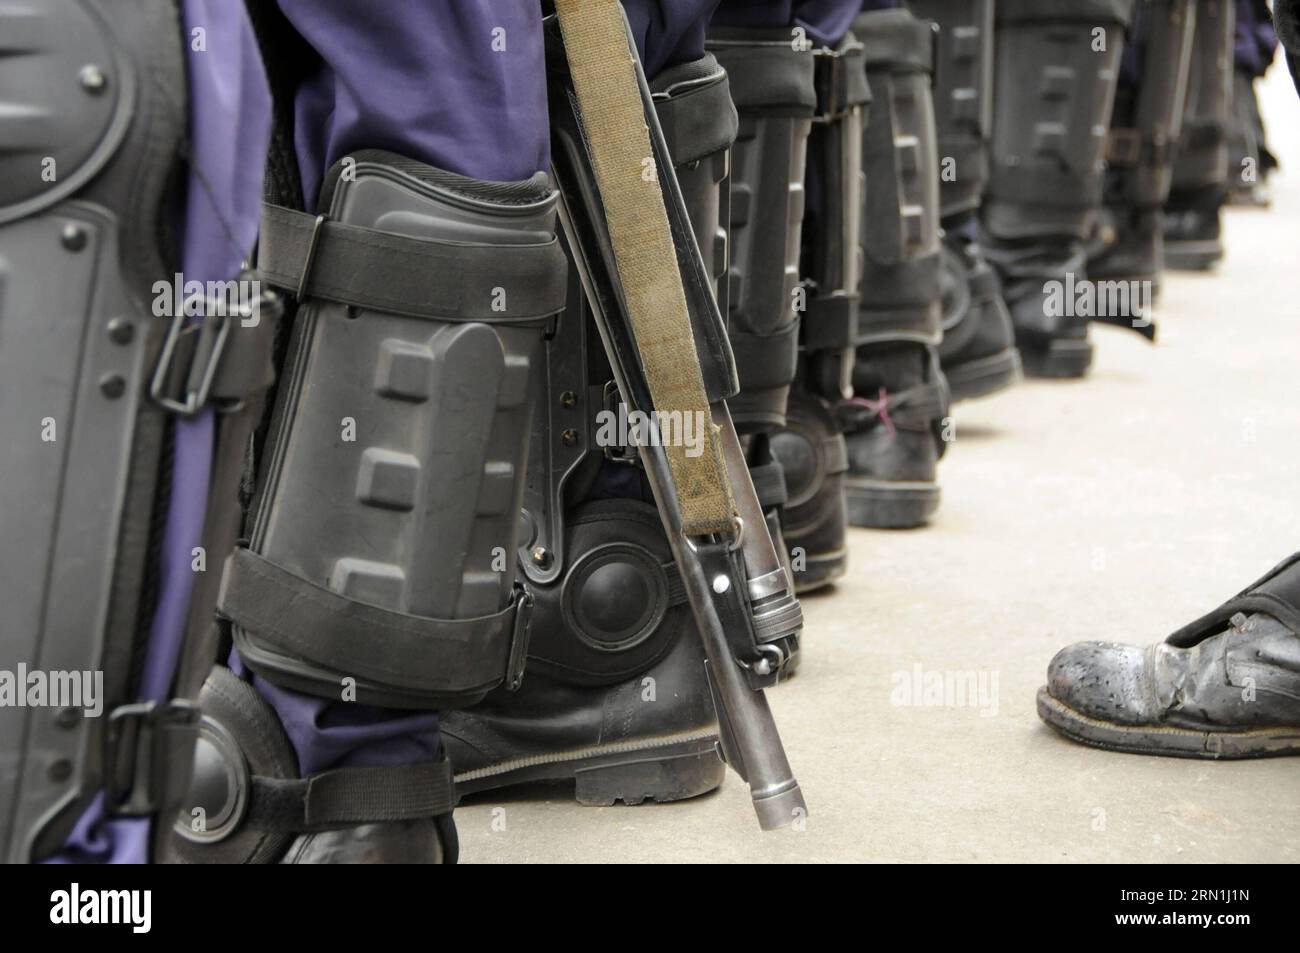 (150104) -- DHAKA, Jan. 4, 2015 -- Bangladeshi policemen stand guard in front of the Bangladesh Nationalist Party (BNP) office in Dhaka, Bangladesh, Jan. 4, 2015. Bangladesh s former prime minister Khaleda Zia, also chairperson of BNP, has remained cordoned off inside her office in capital Dhaka s Gushan diplomatic enclave since Saturday night. Police have also locked down the BNP s headquarters after searching it. )(zhf) BANGLADESH-DHAKA-EX-PM-OFFICE-CORDON OFF SharifulxIslam PUBLICATIONxNOTxINxCHN   Dhaka Jan 4 2015 Bangladeshi Policemen stand Guard in Front of The Bangladesh Nationalist Par Stock Photo